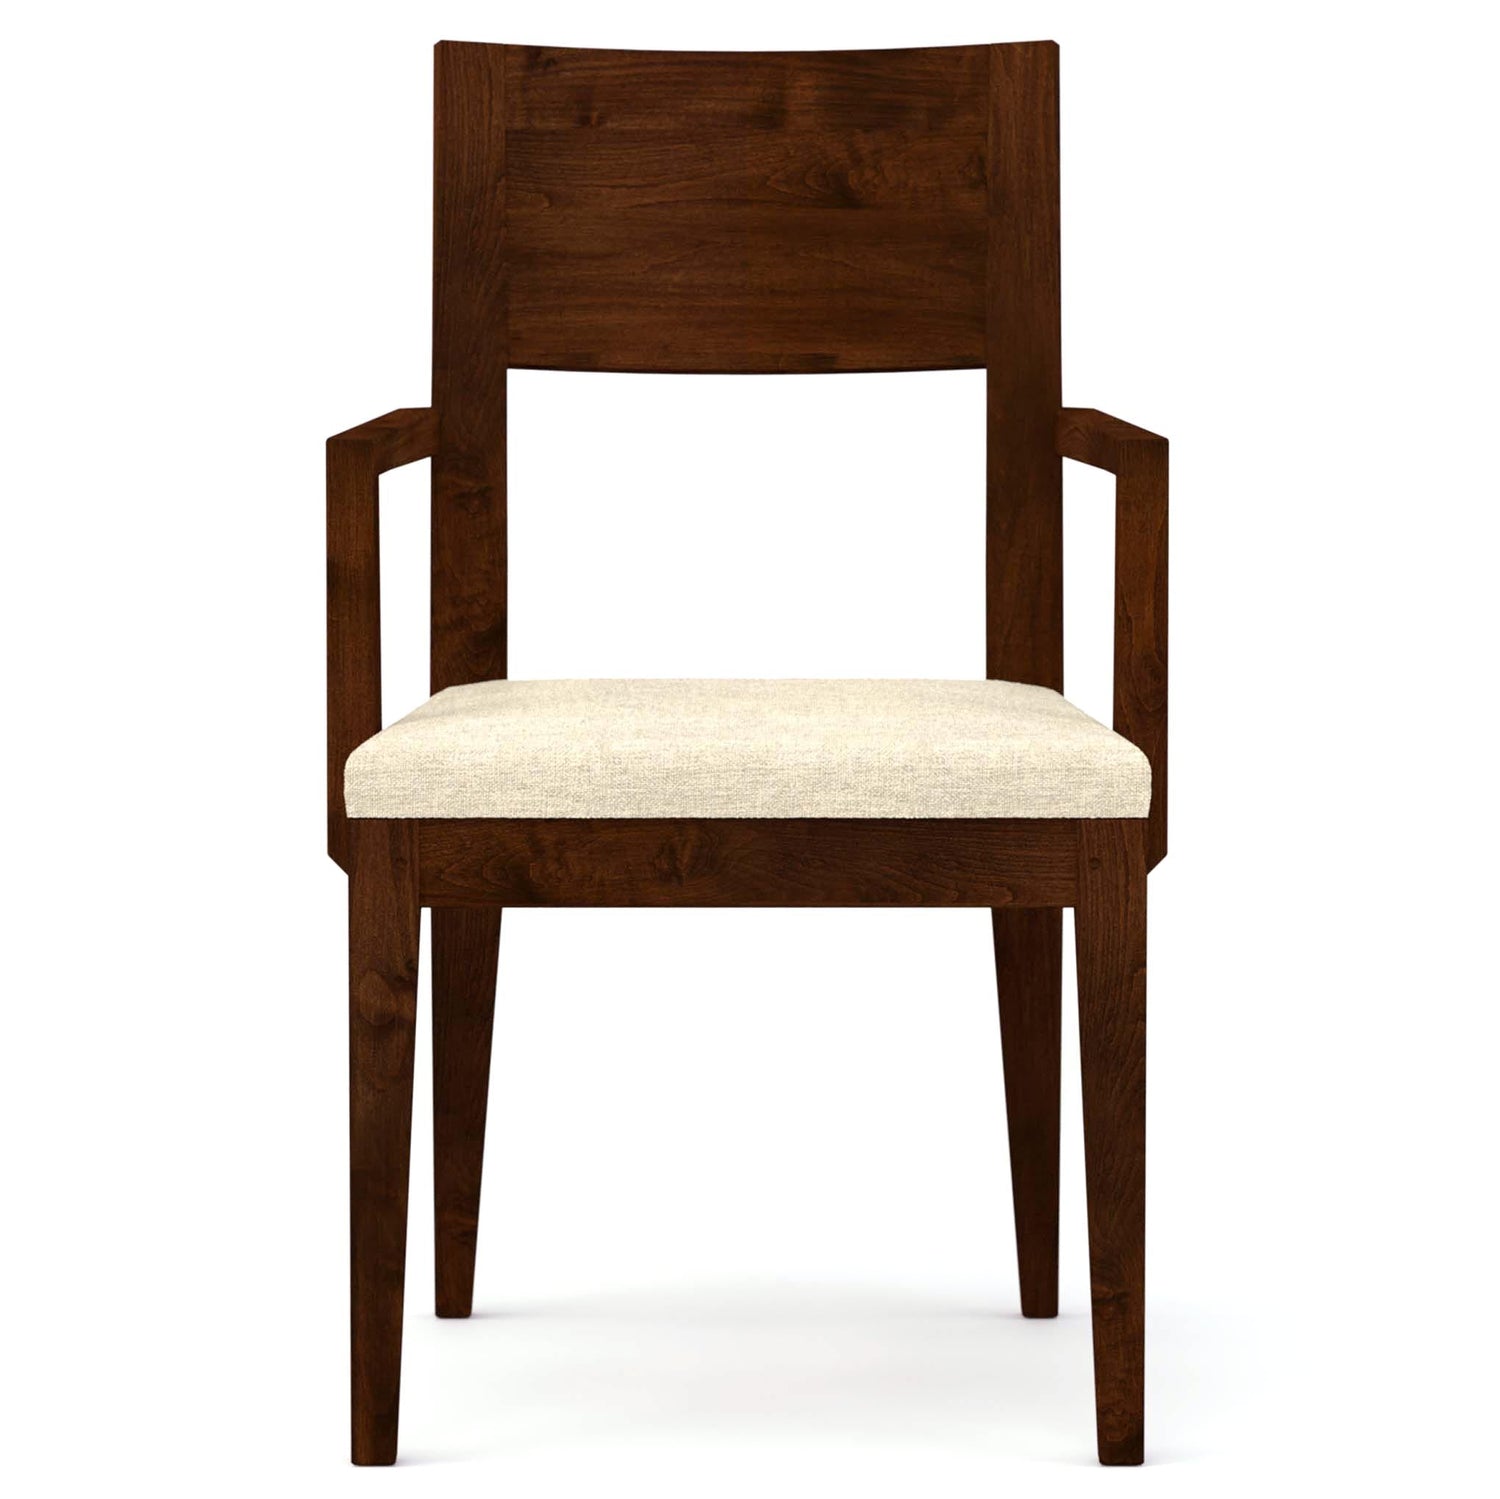 Dwyer Upholstered Arm Chair